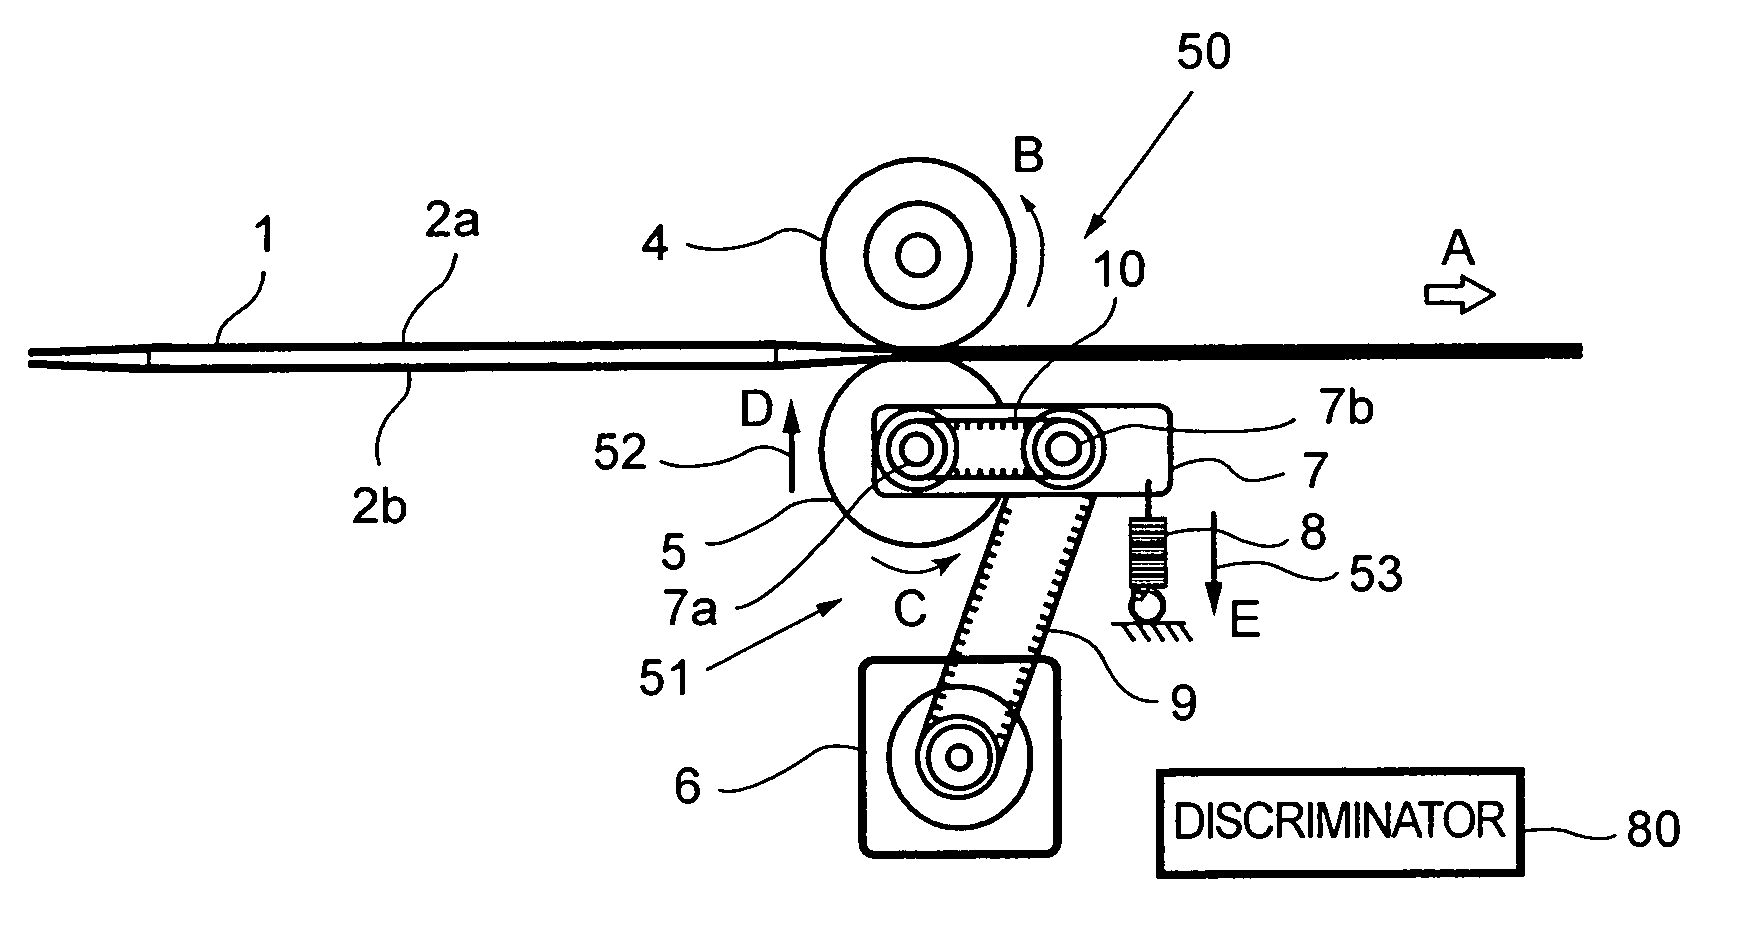 Overlapped-sheet detection apparatus